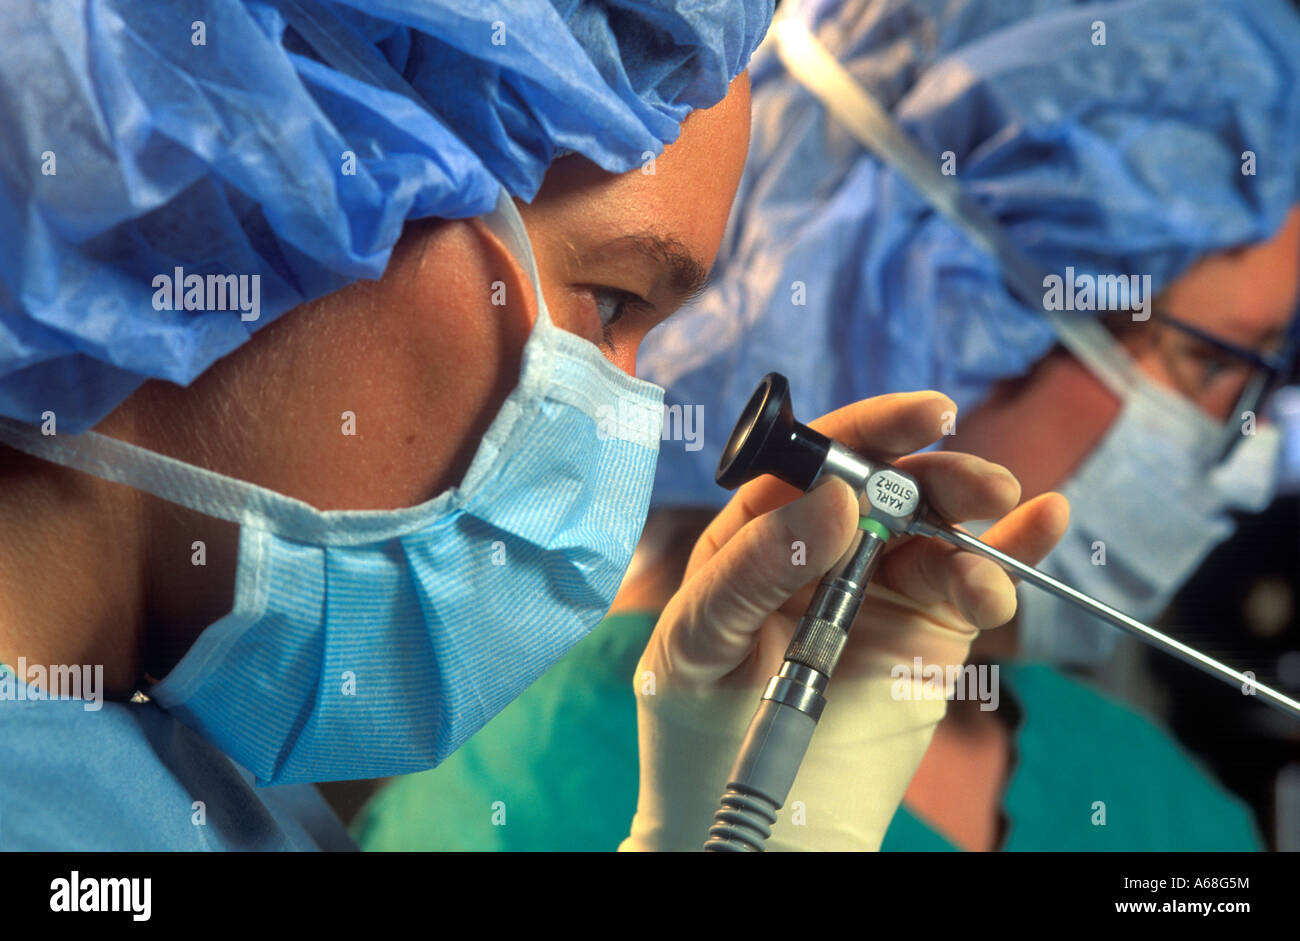 Surgeon using a arthroscope during surgical procedure Stock Photo